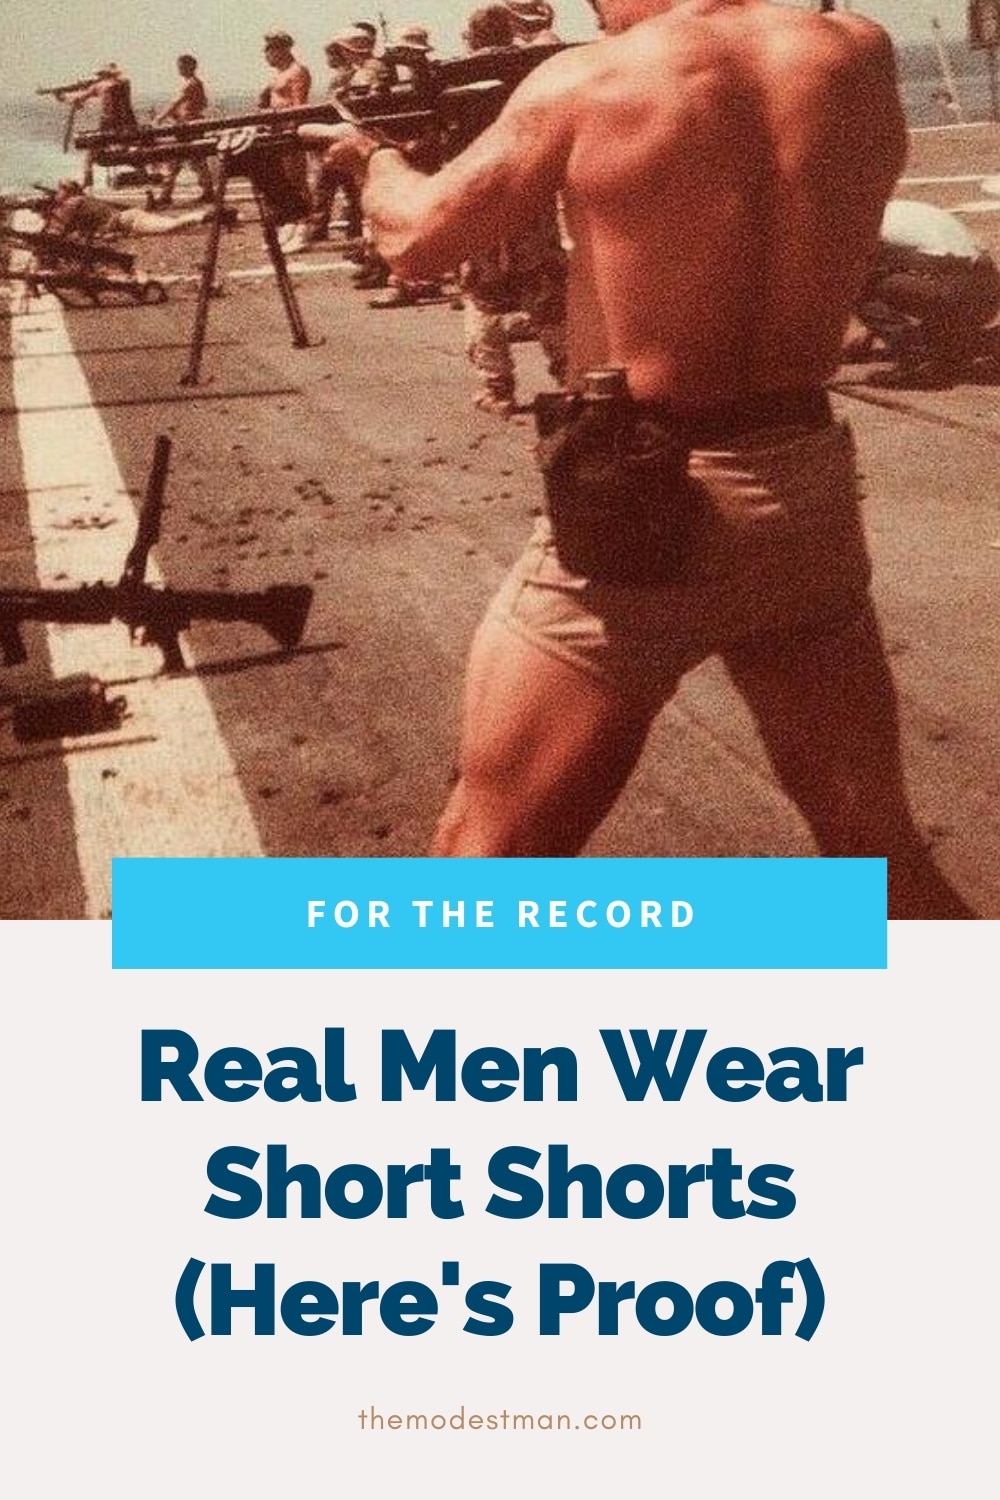 Real Men Wear Short Shorts (Here's Proof) - The Modest Man